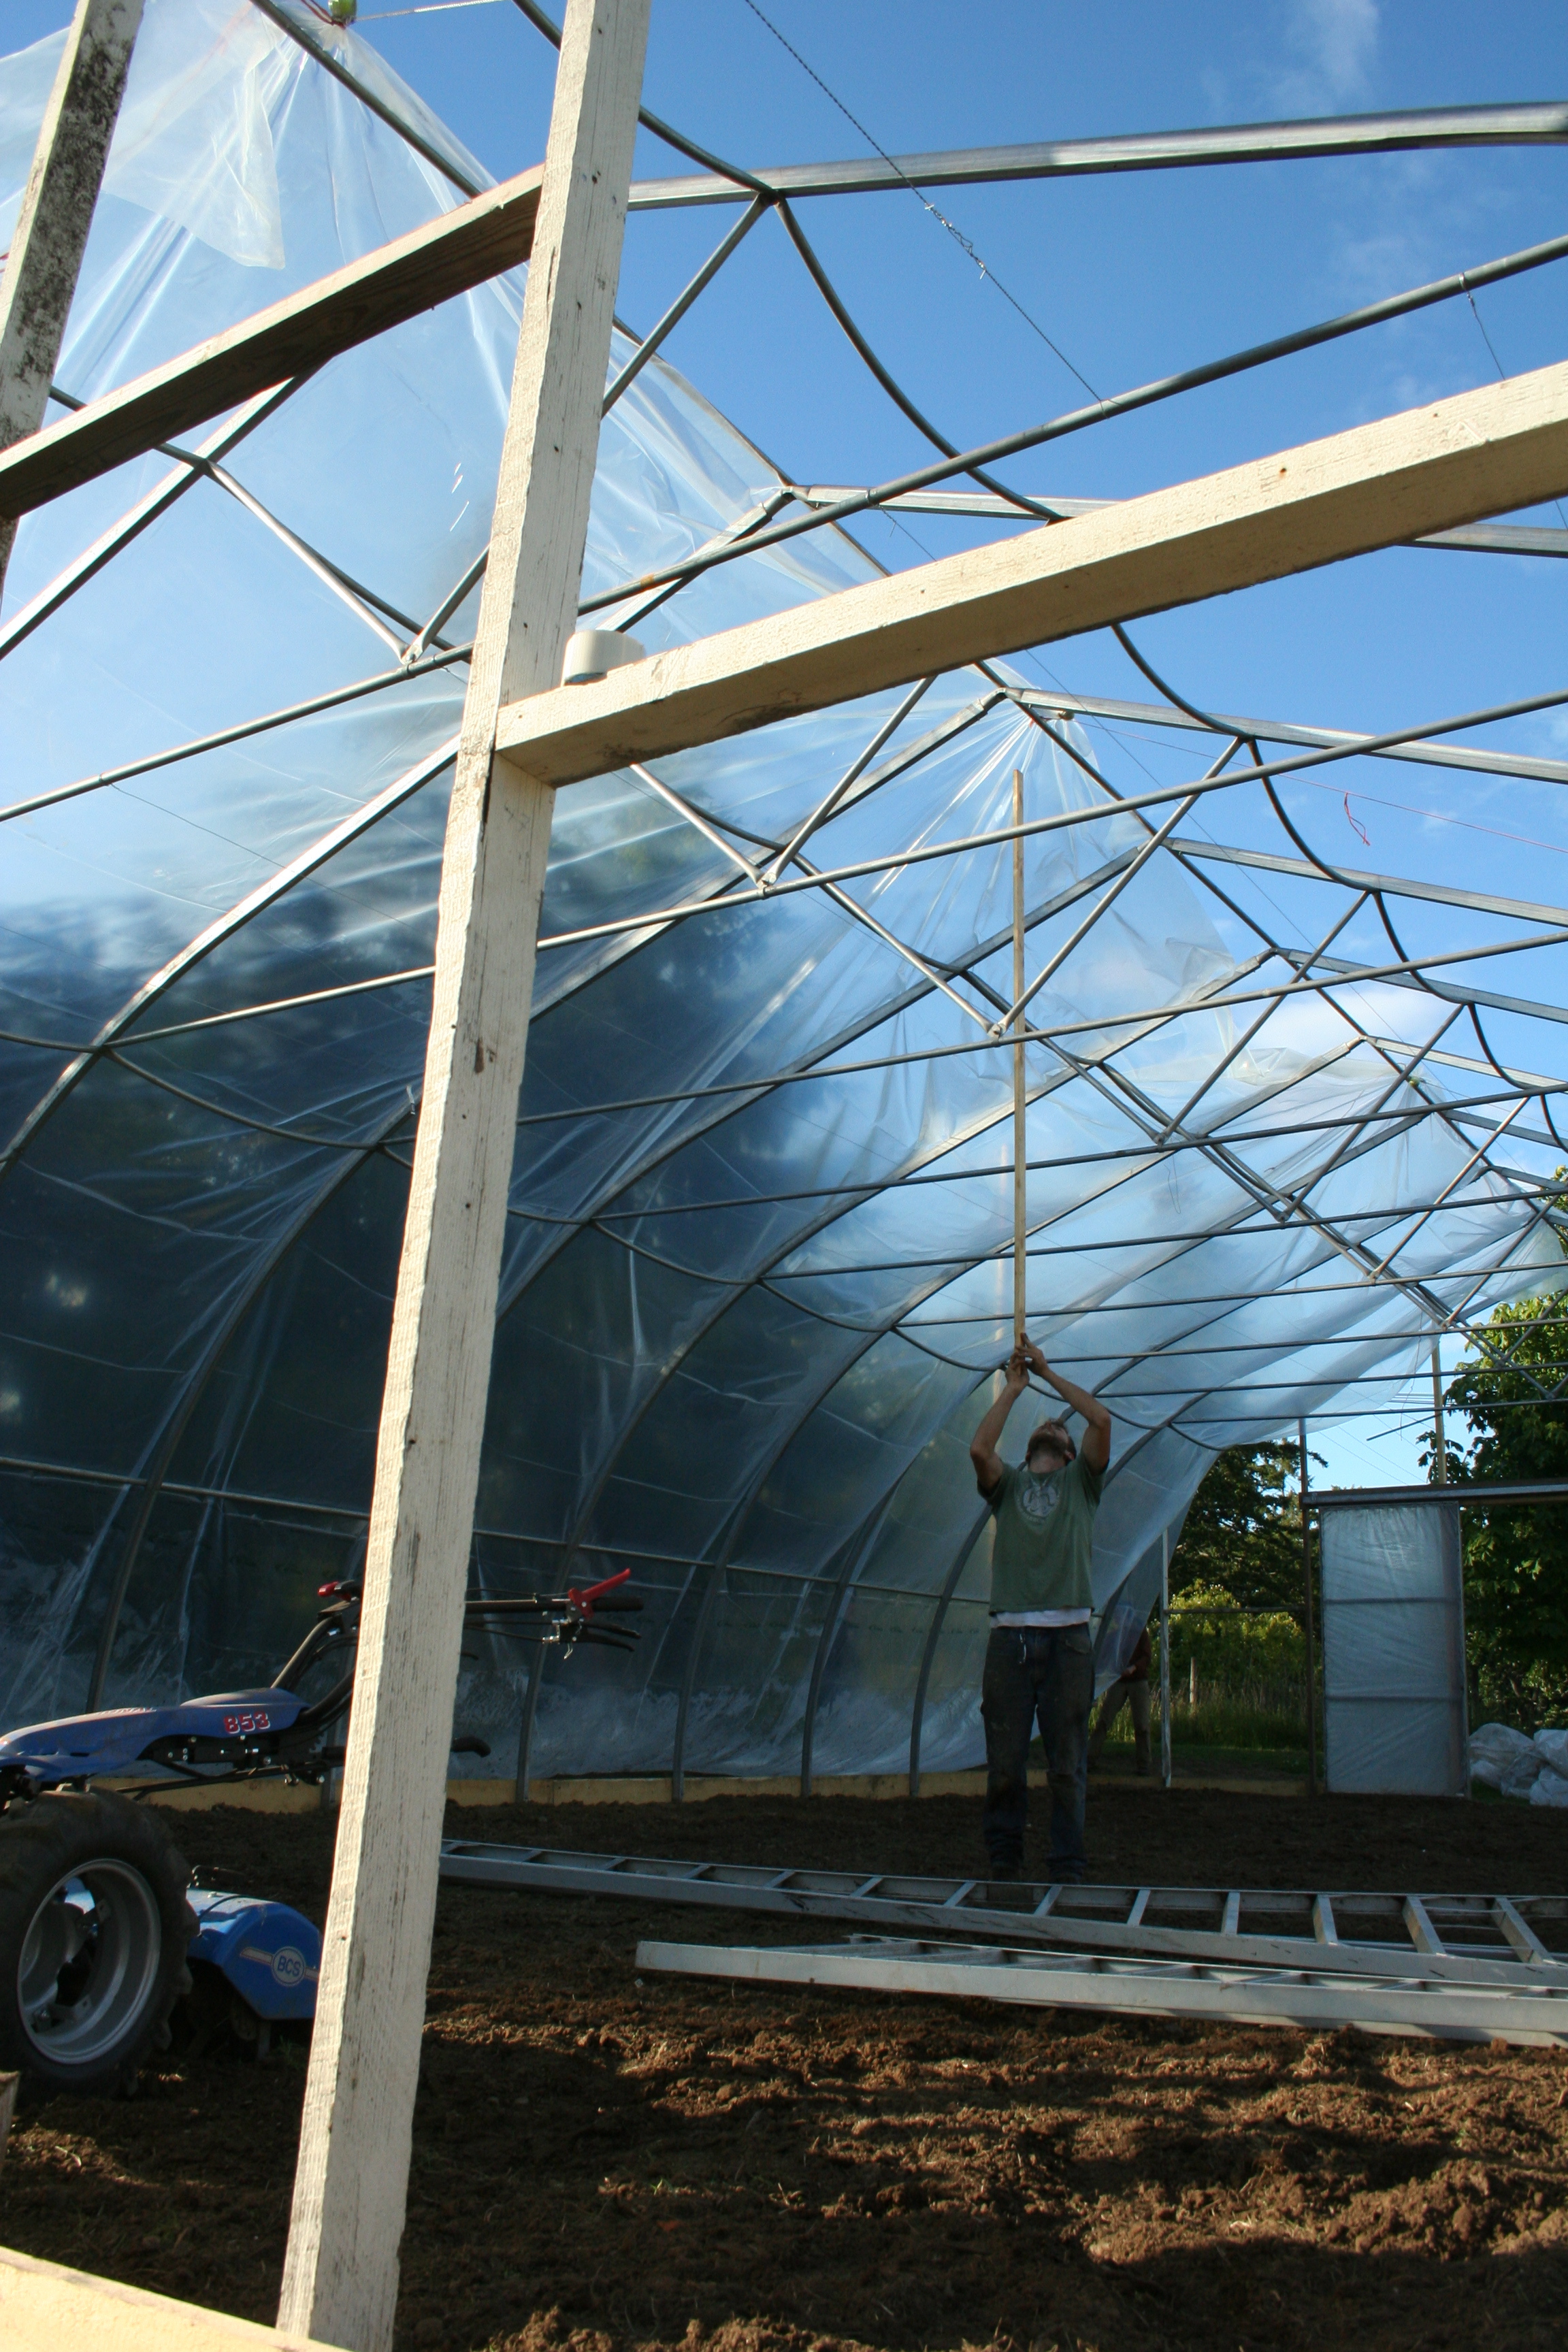 Bringing the plastic over the greenhouse arches. 